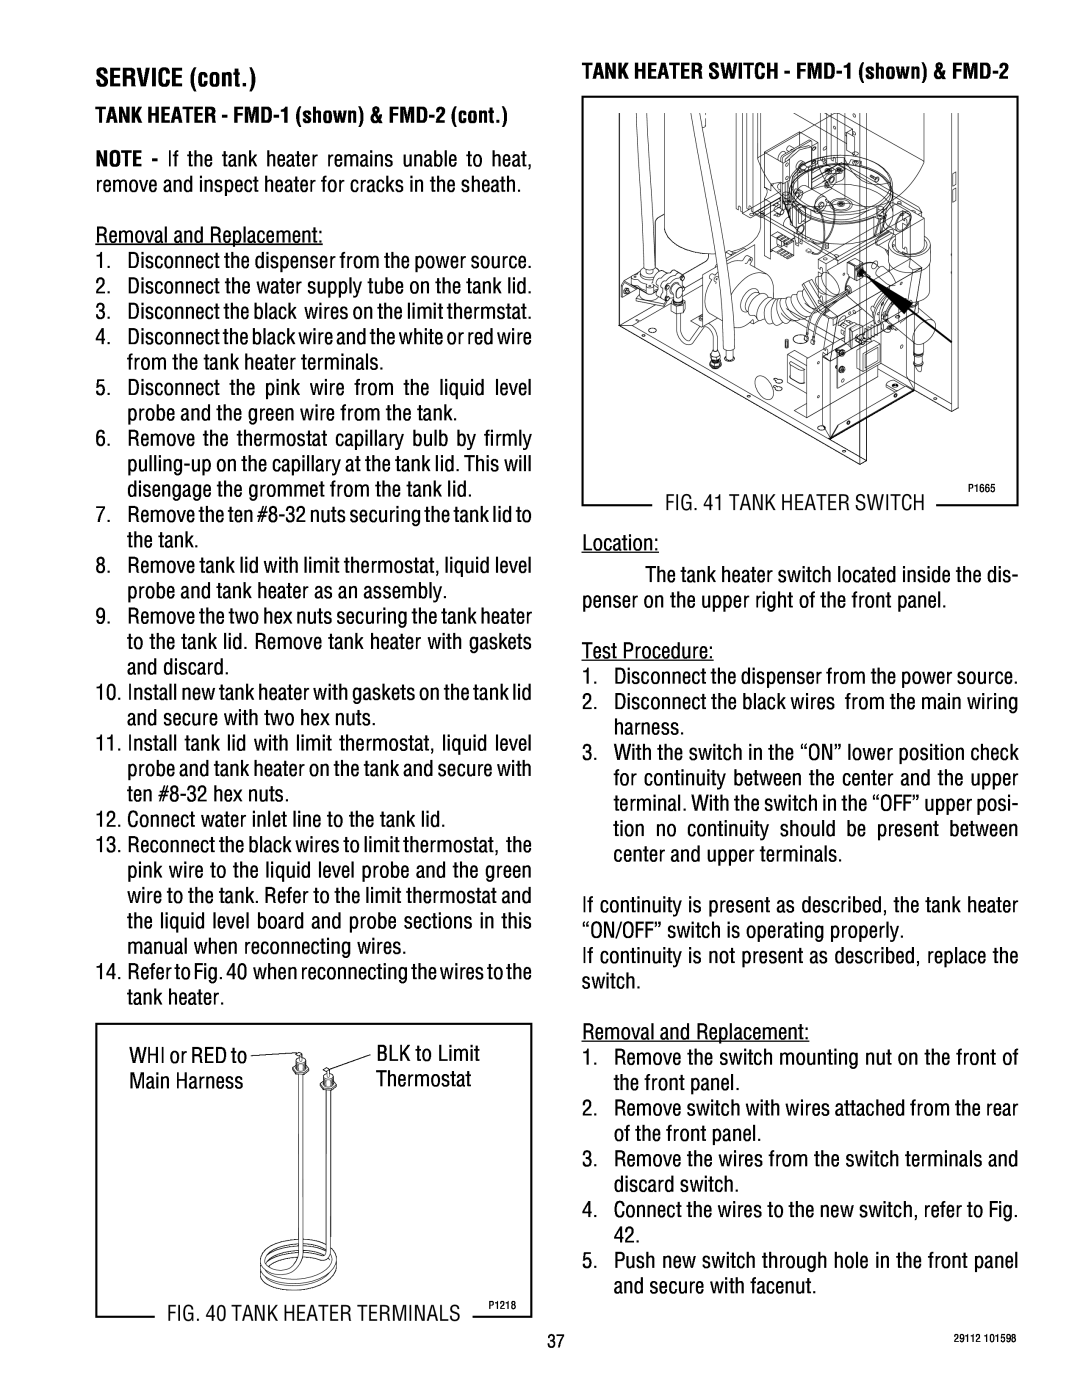 Bunn service manual TANK HEATER - FMD-1shown & FMD-2cont, SERVICE cont 